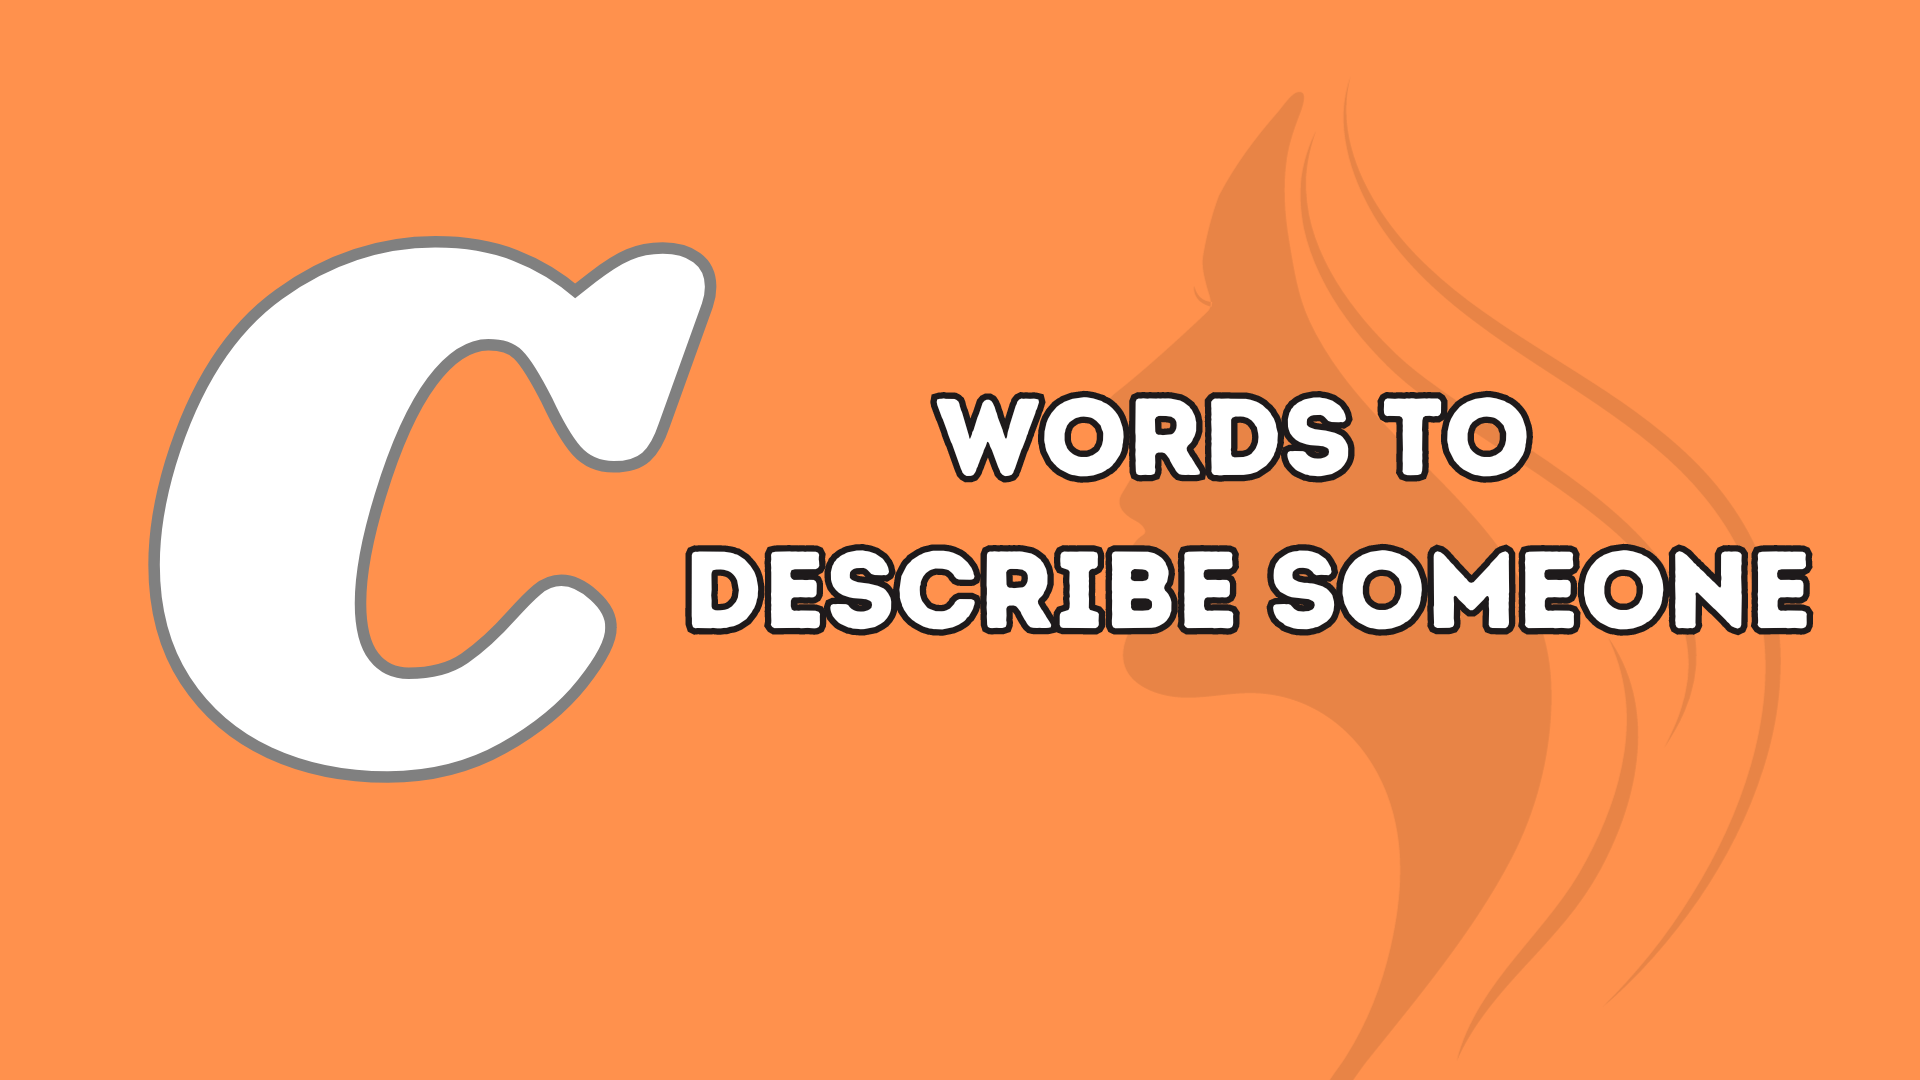 ‘C’ Words To Describe Someone